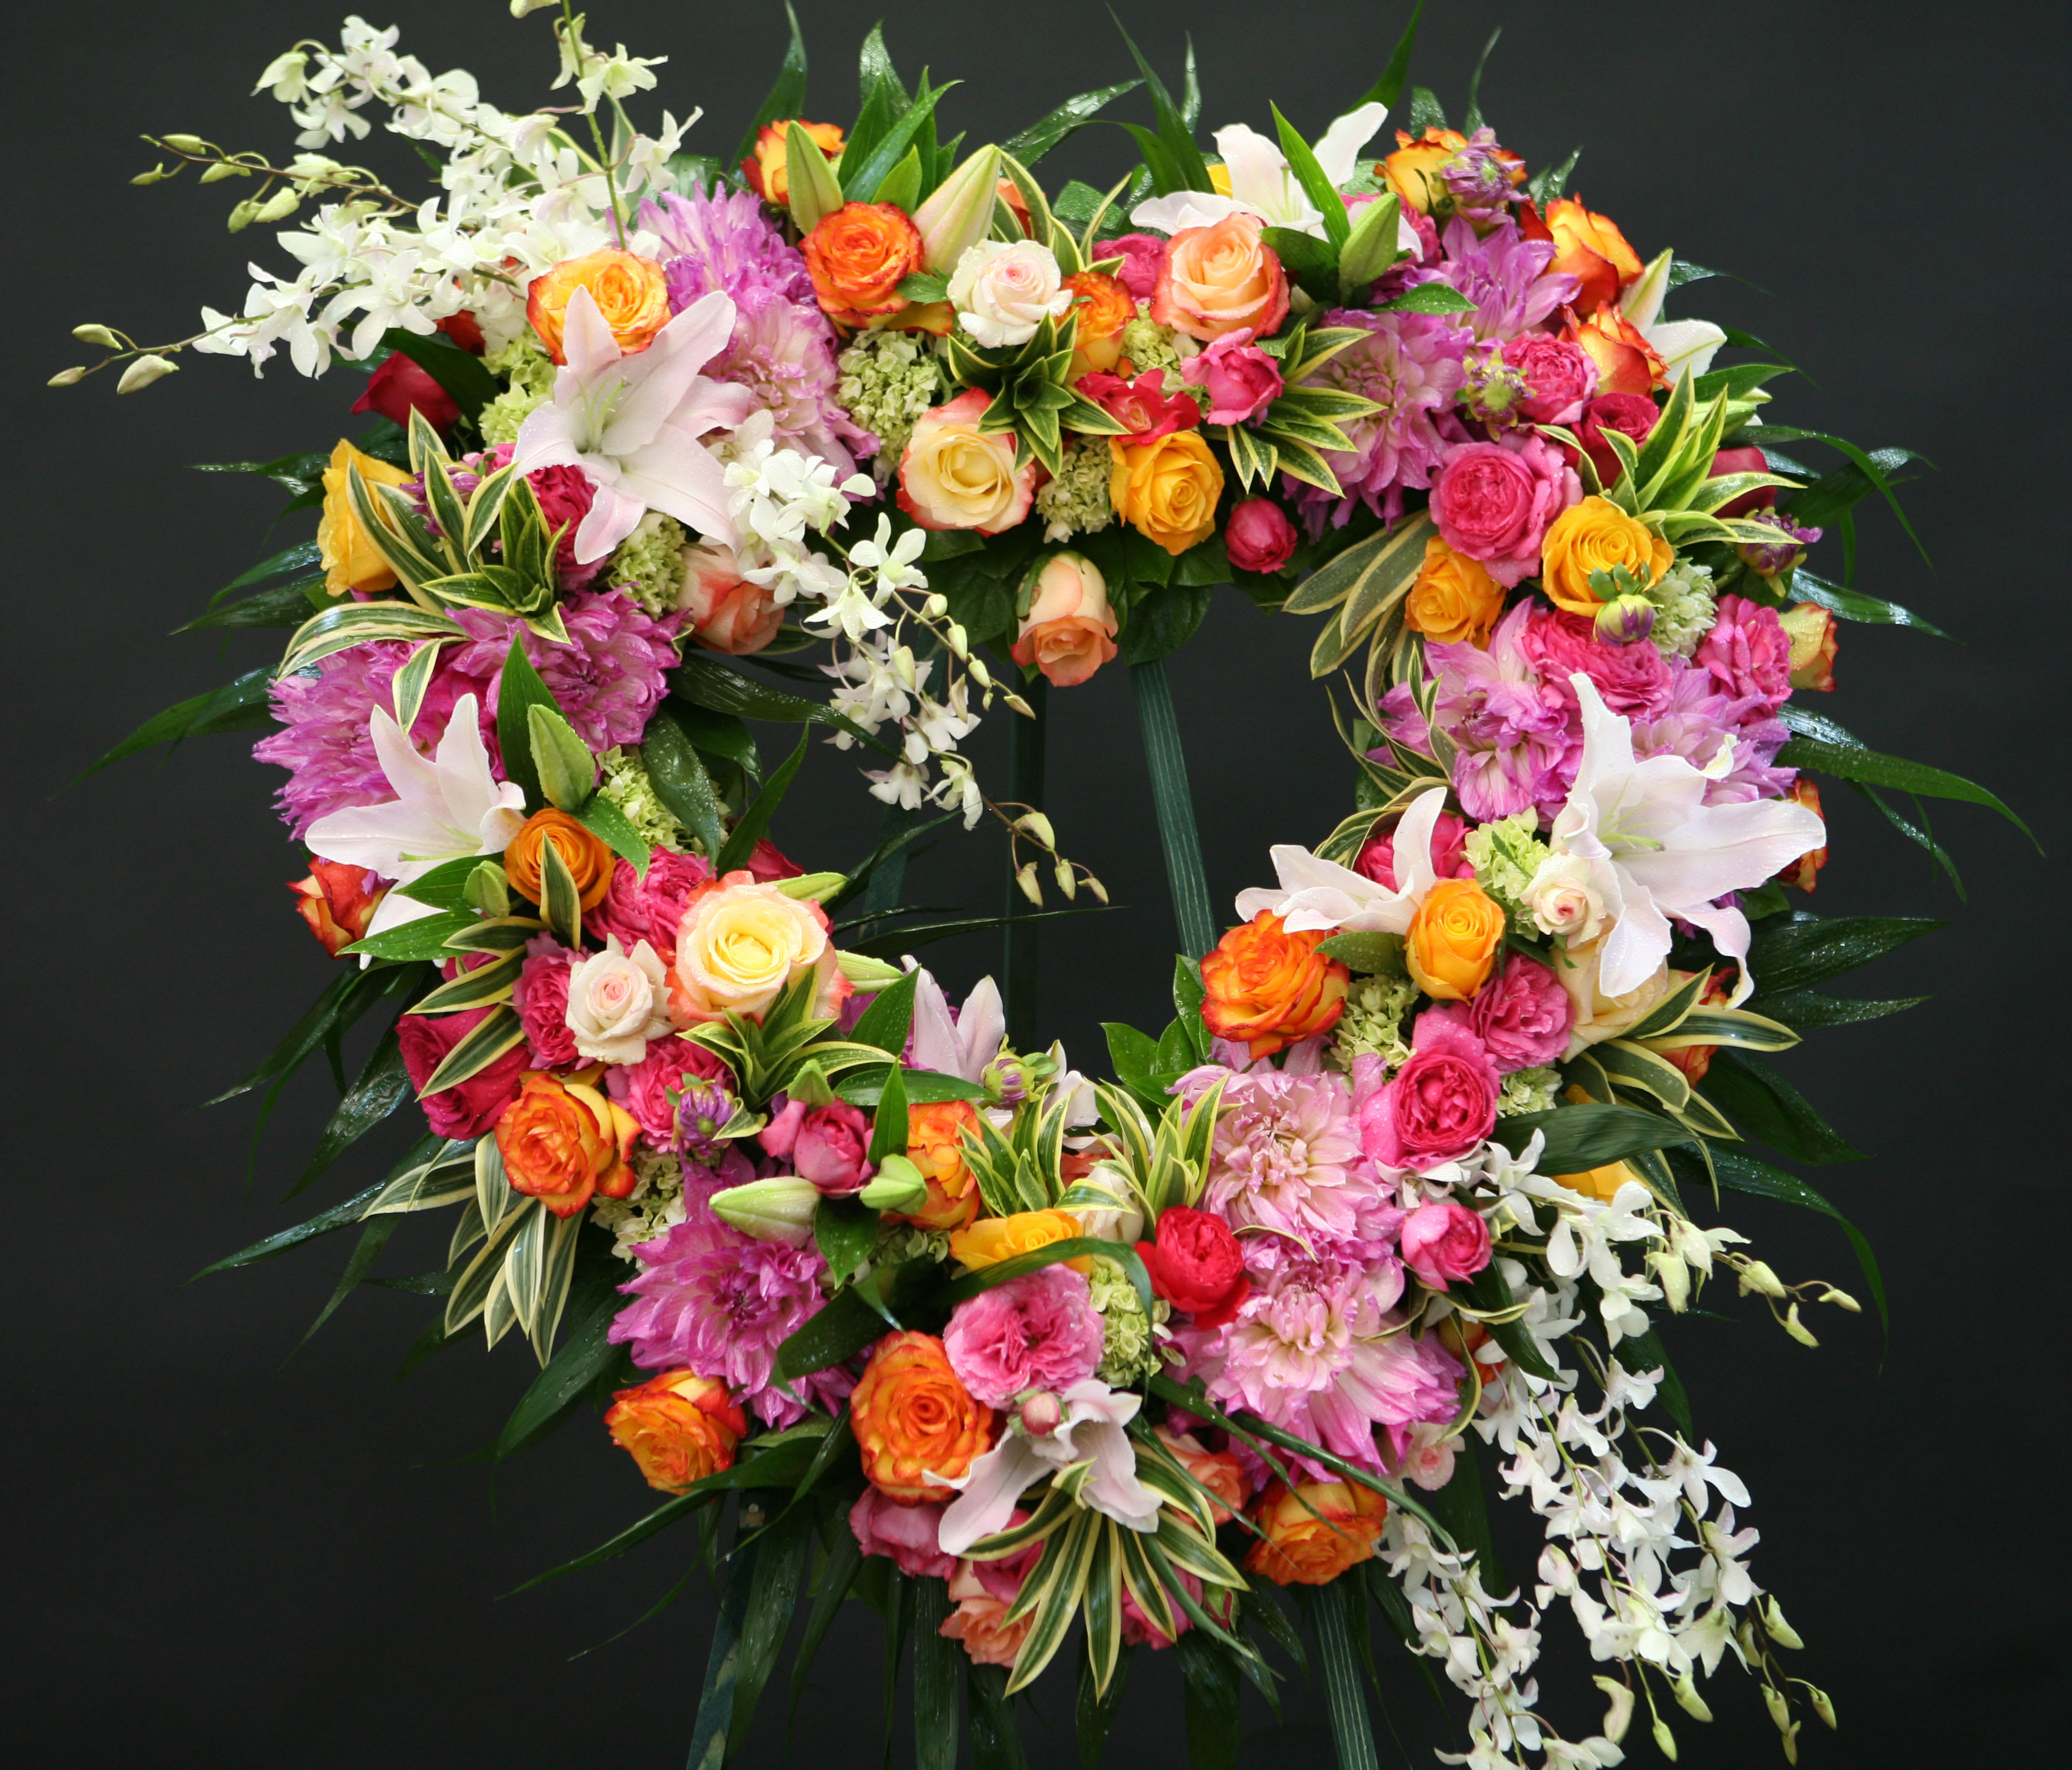 Spirited Heart Wreath with Roses, Lilies &amp; Orchids - An assortment of white, orange, and pink florals in a heart-shaped wreath. May include roses, lilies, dendrobium orchids, dahlias, hydrangea and mixed greens.